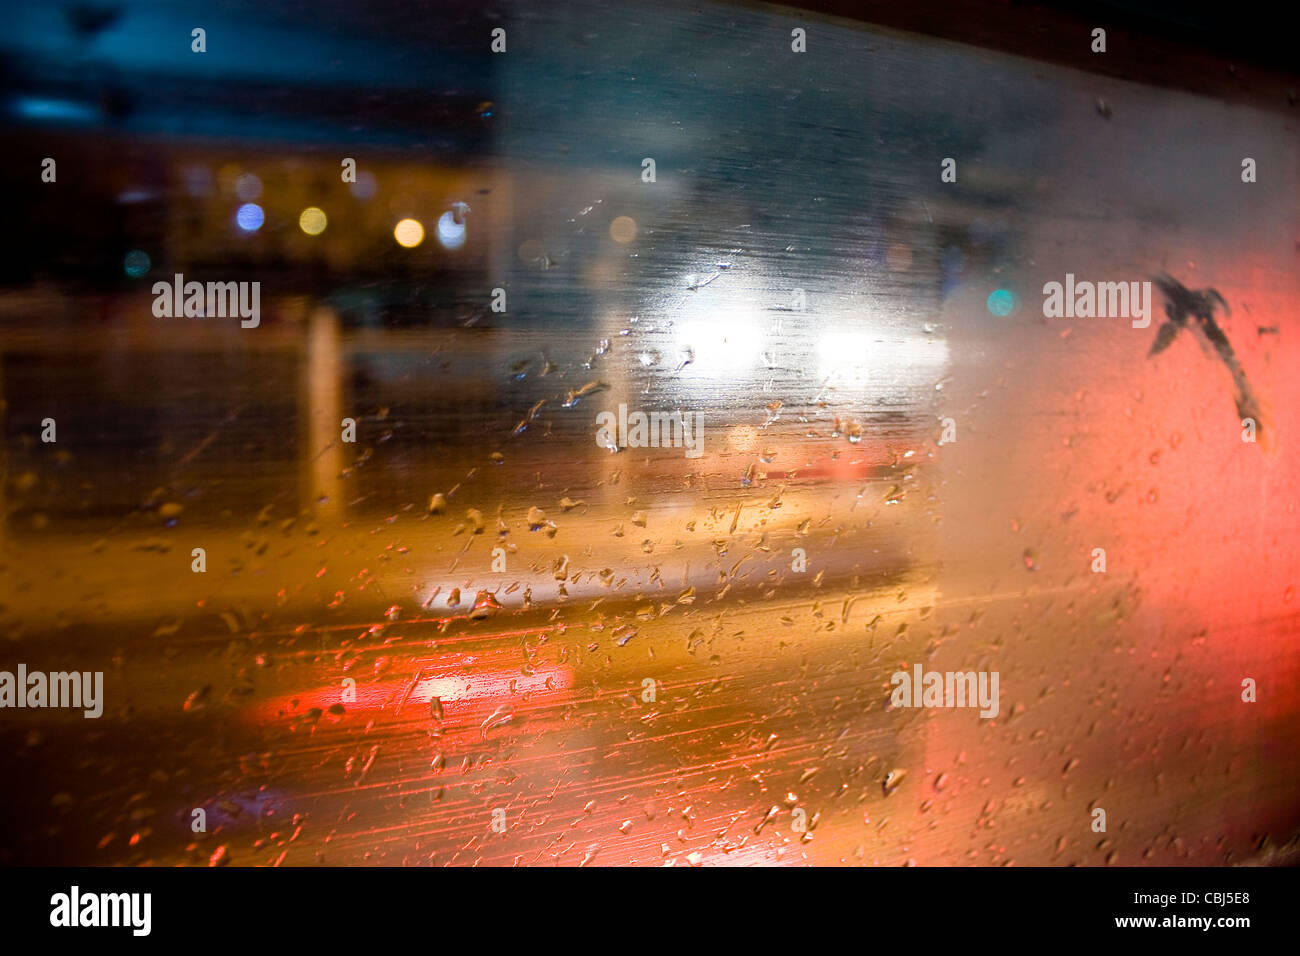 Rainy night lights out the window of the streamer Stock Photo